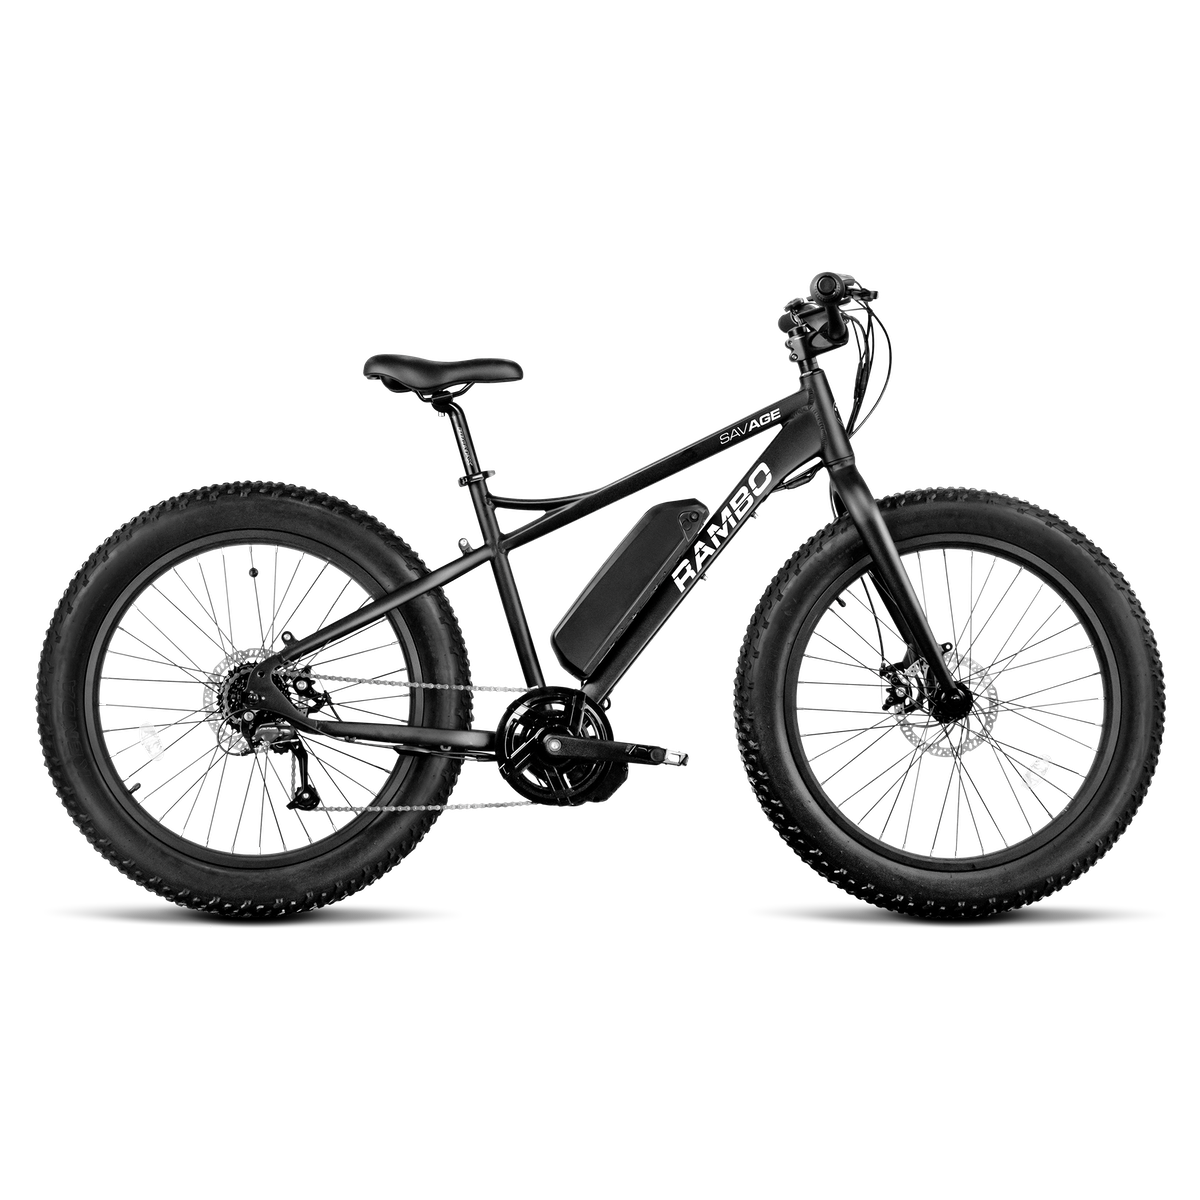 Rambo - The Savage 750W Full Frame Electric Bike w/ Free Both Fenders, Front Rack XP and Rear XL Luggage Rack